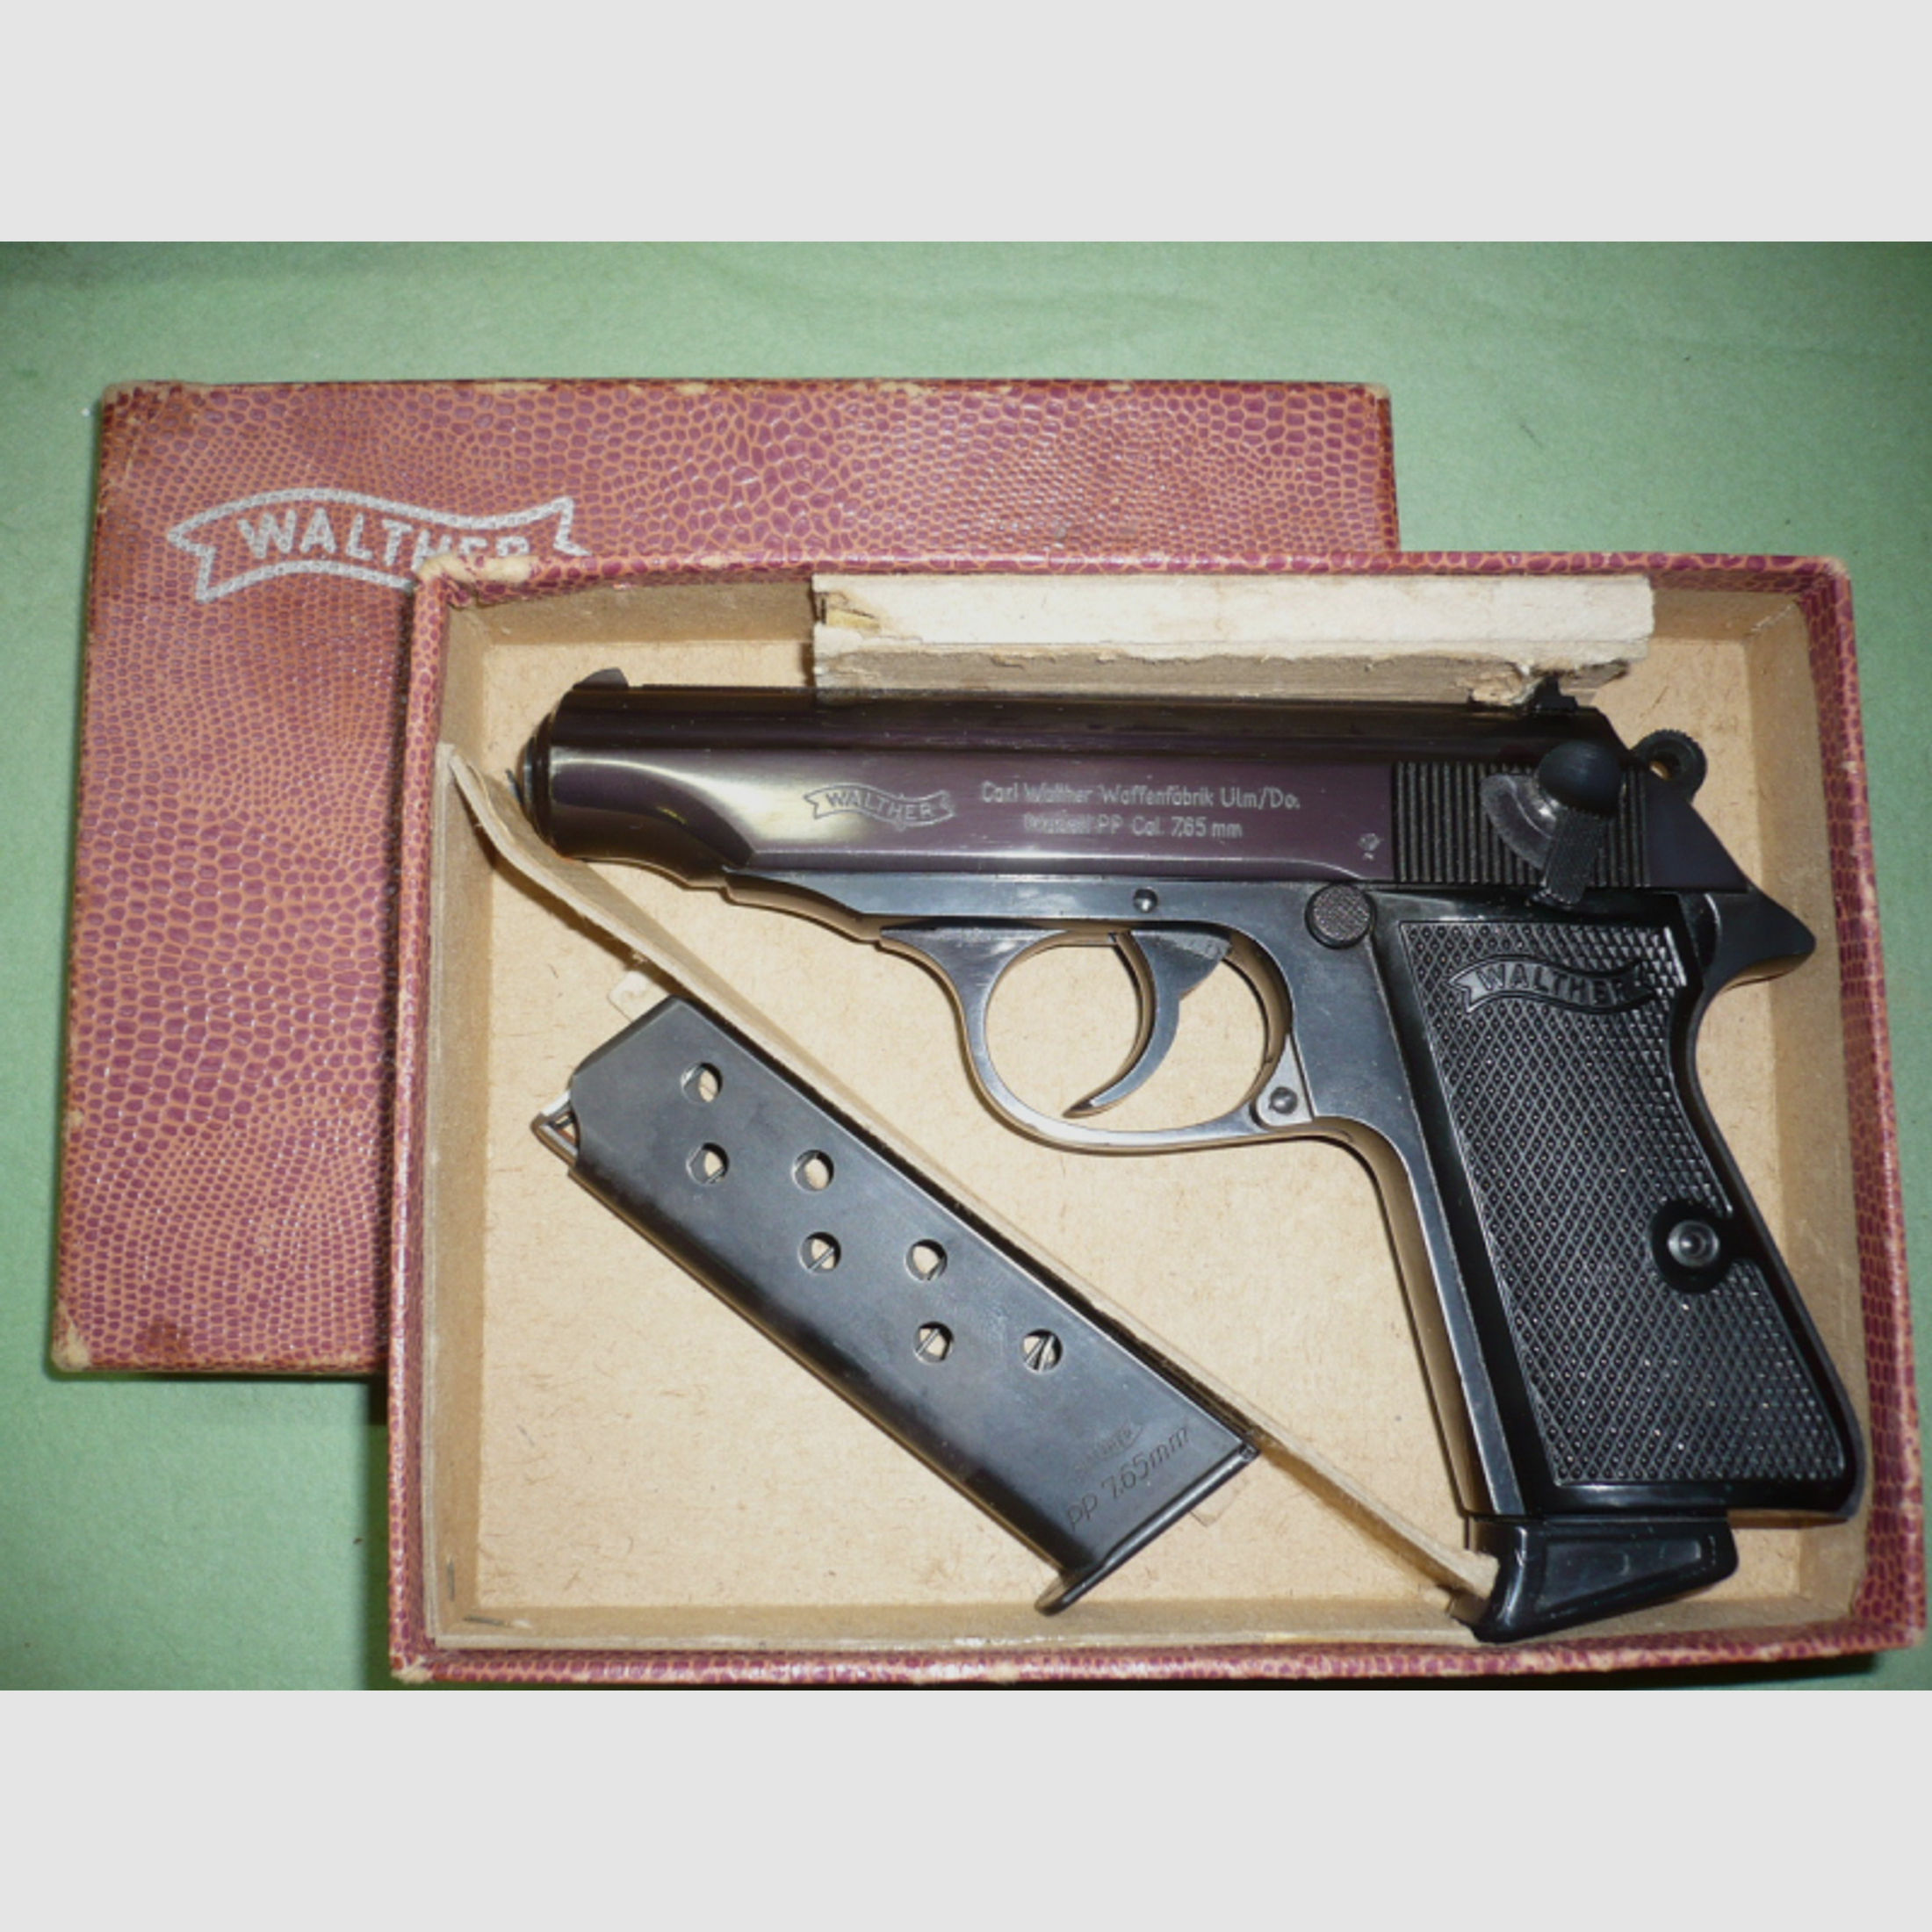 1 Pistole Walther PP, Kal. 7,65mmBrowning